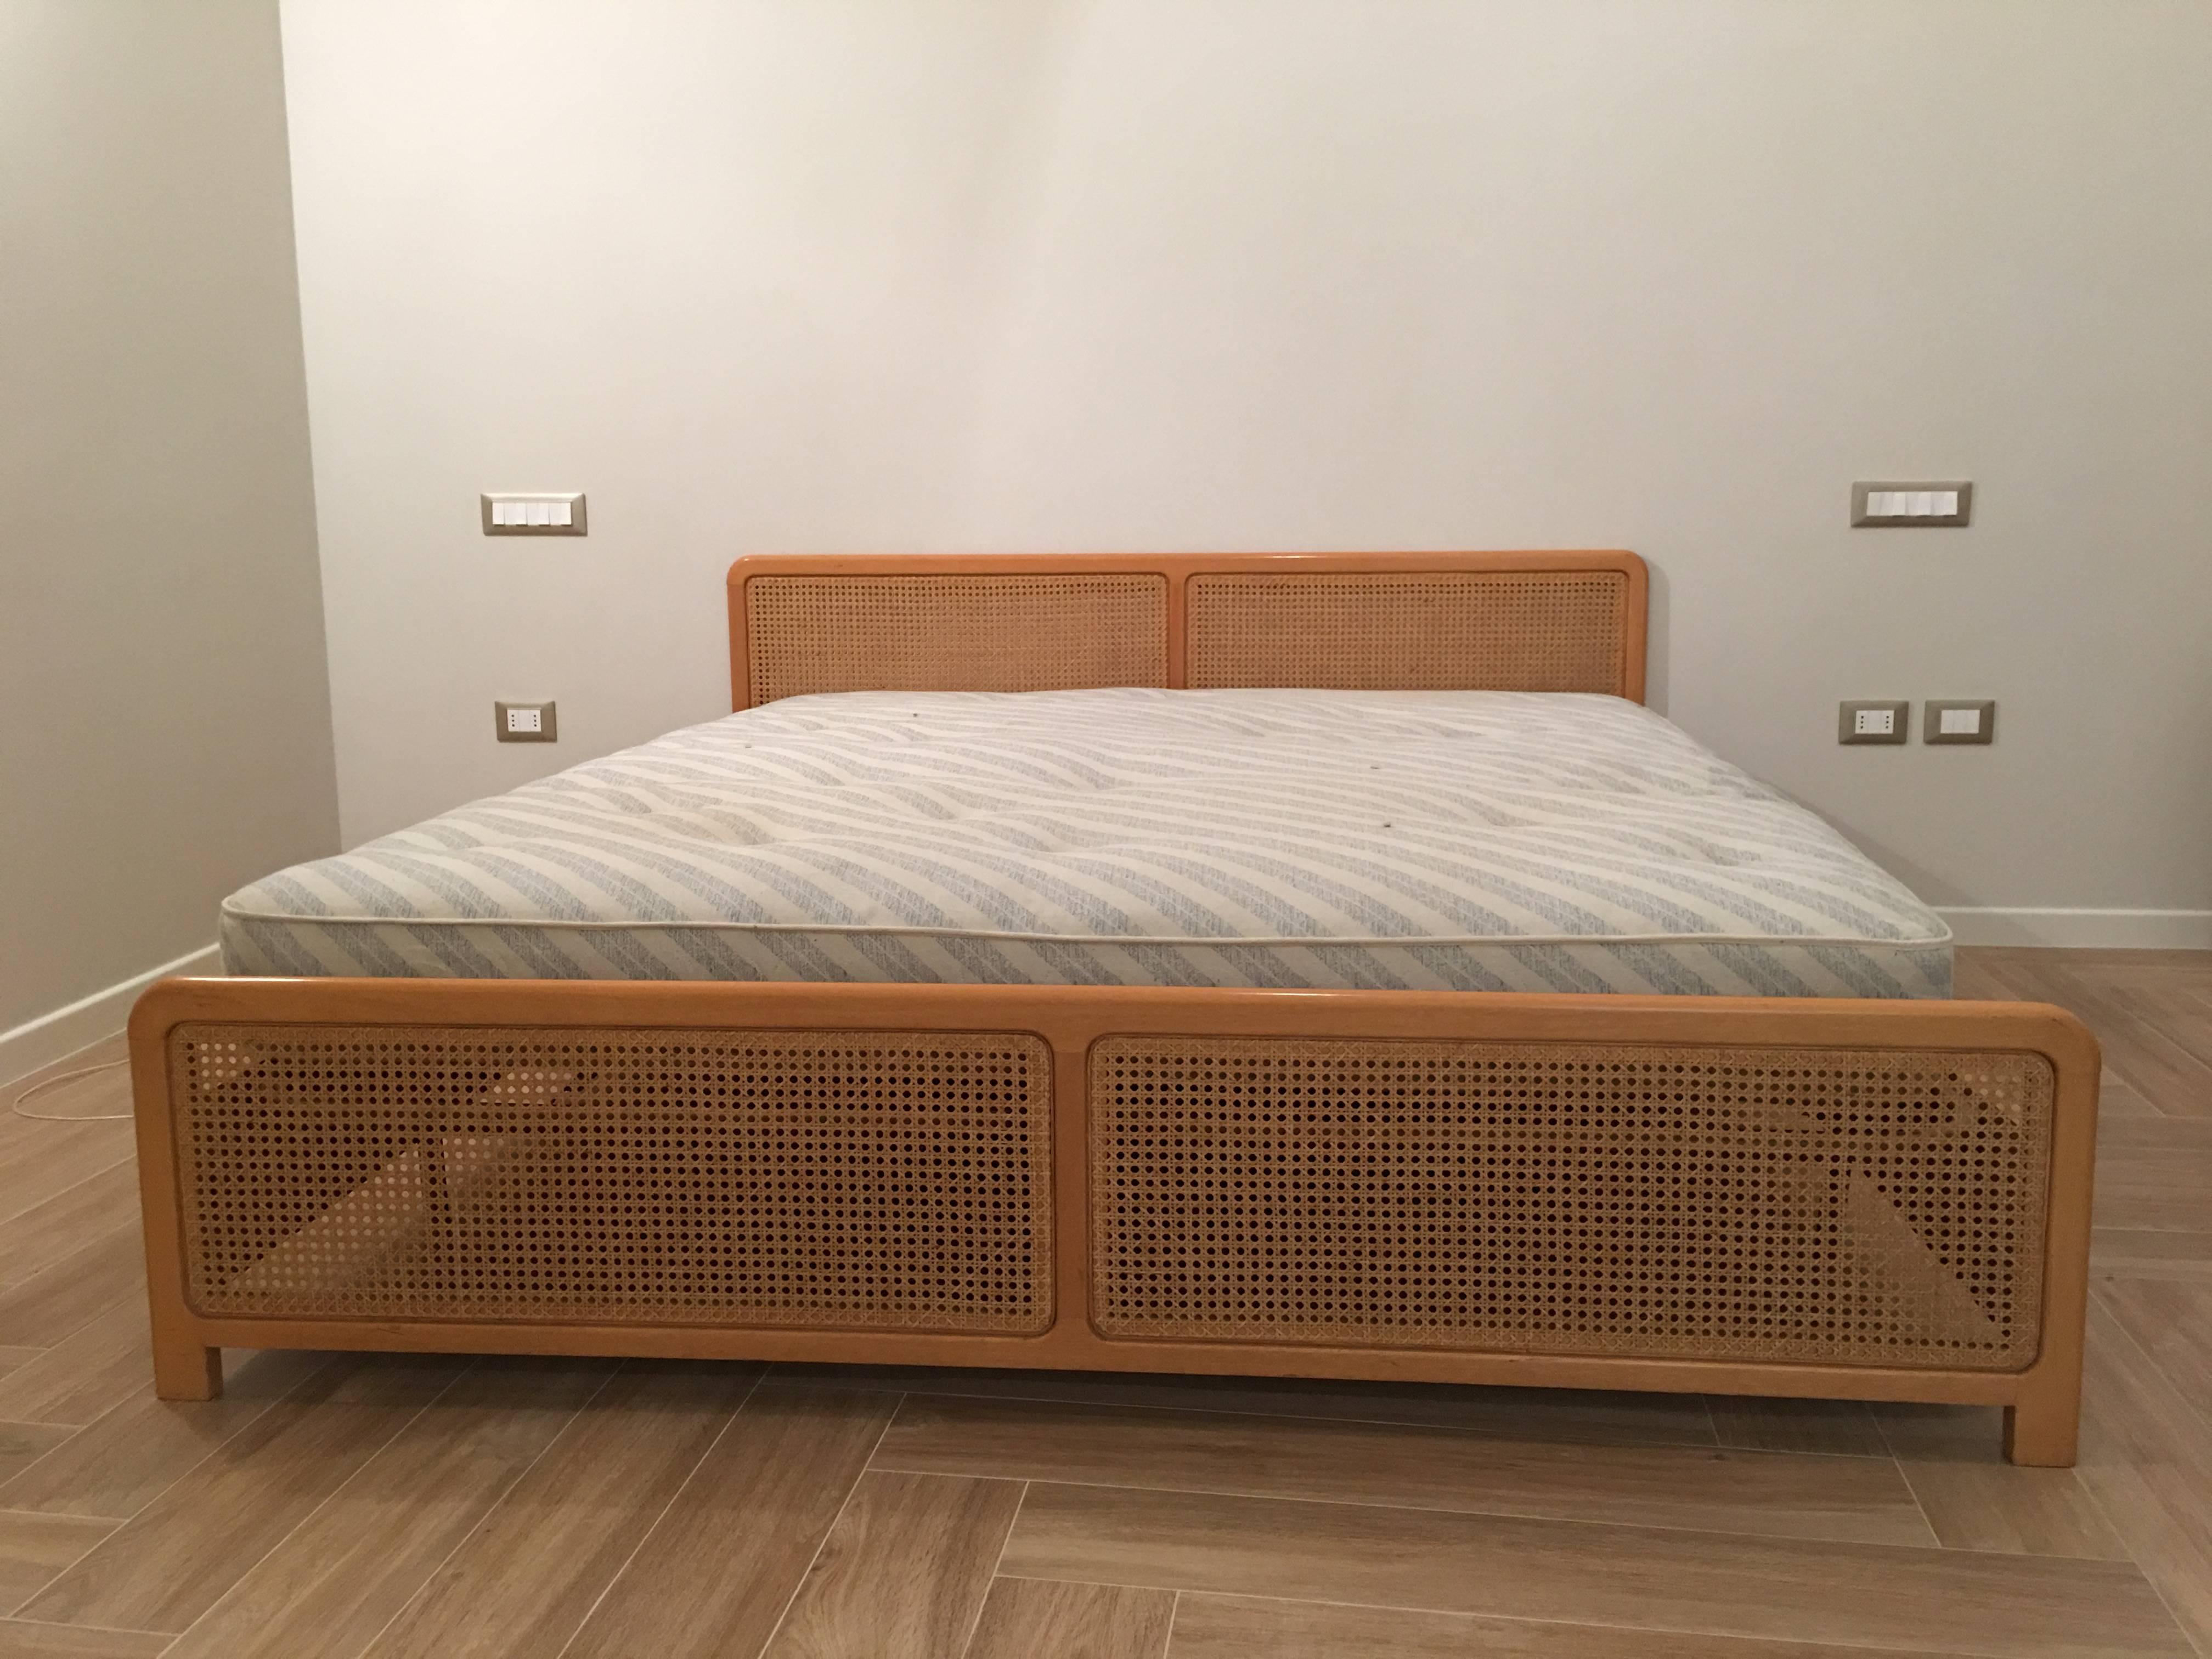 Italian Wooden Cane Double Bed Frame